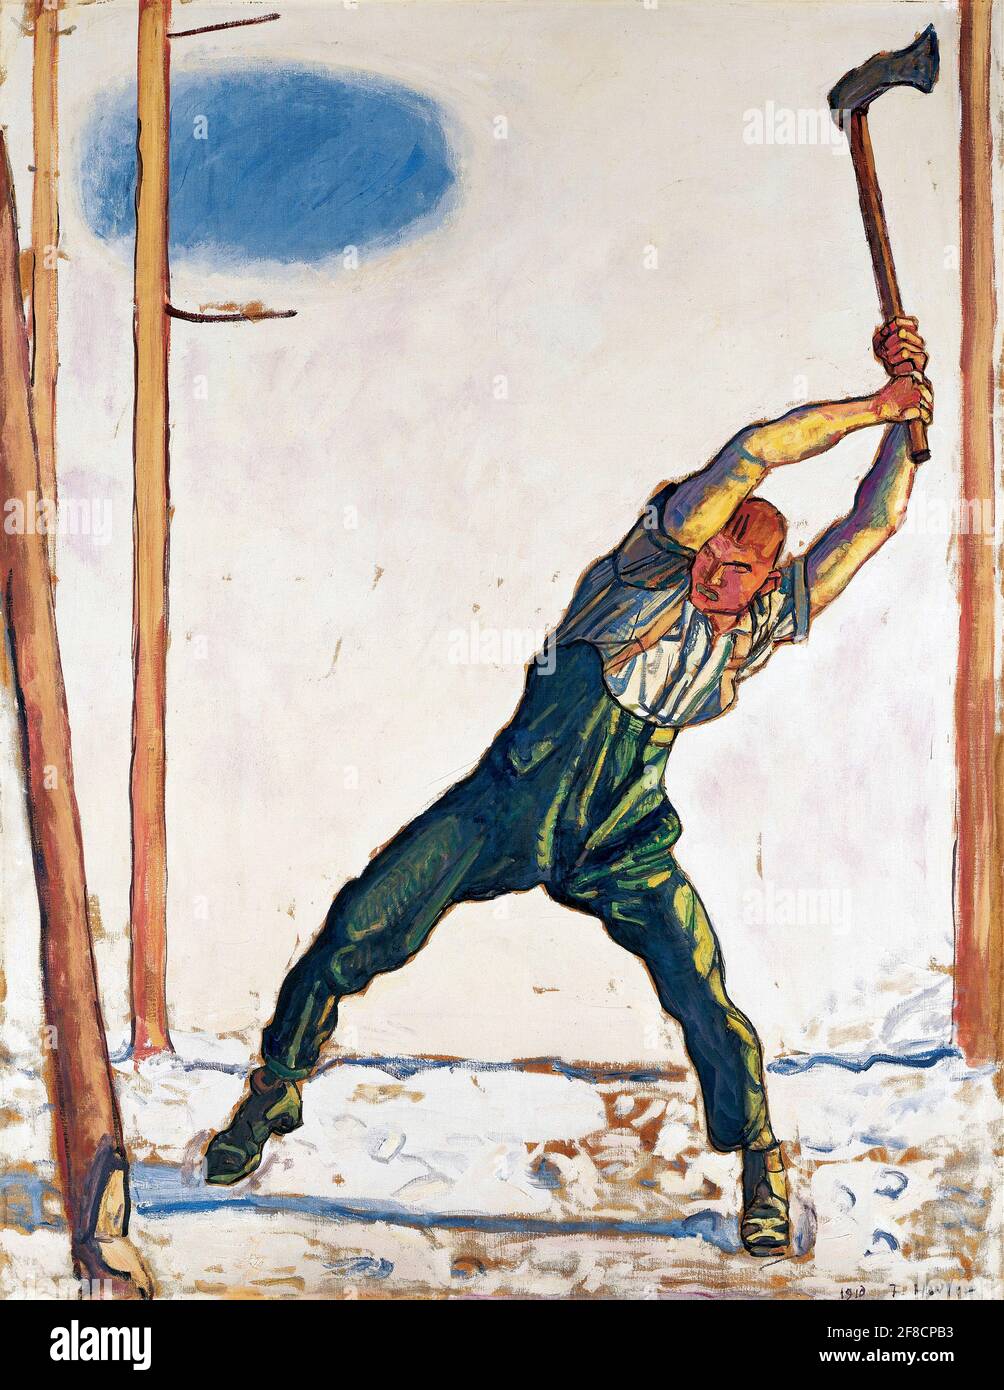 Ferdinand Hodler. Painting entitled 'Woodcutter' by the Swiss symbolist painter, Ferdinand Hodler (1853- 1918). oil on canvas, 1910 Stock Photo